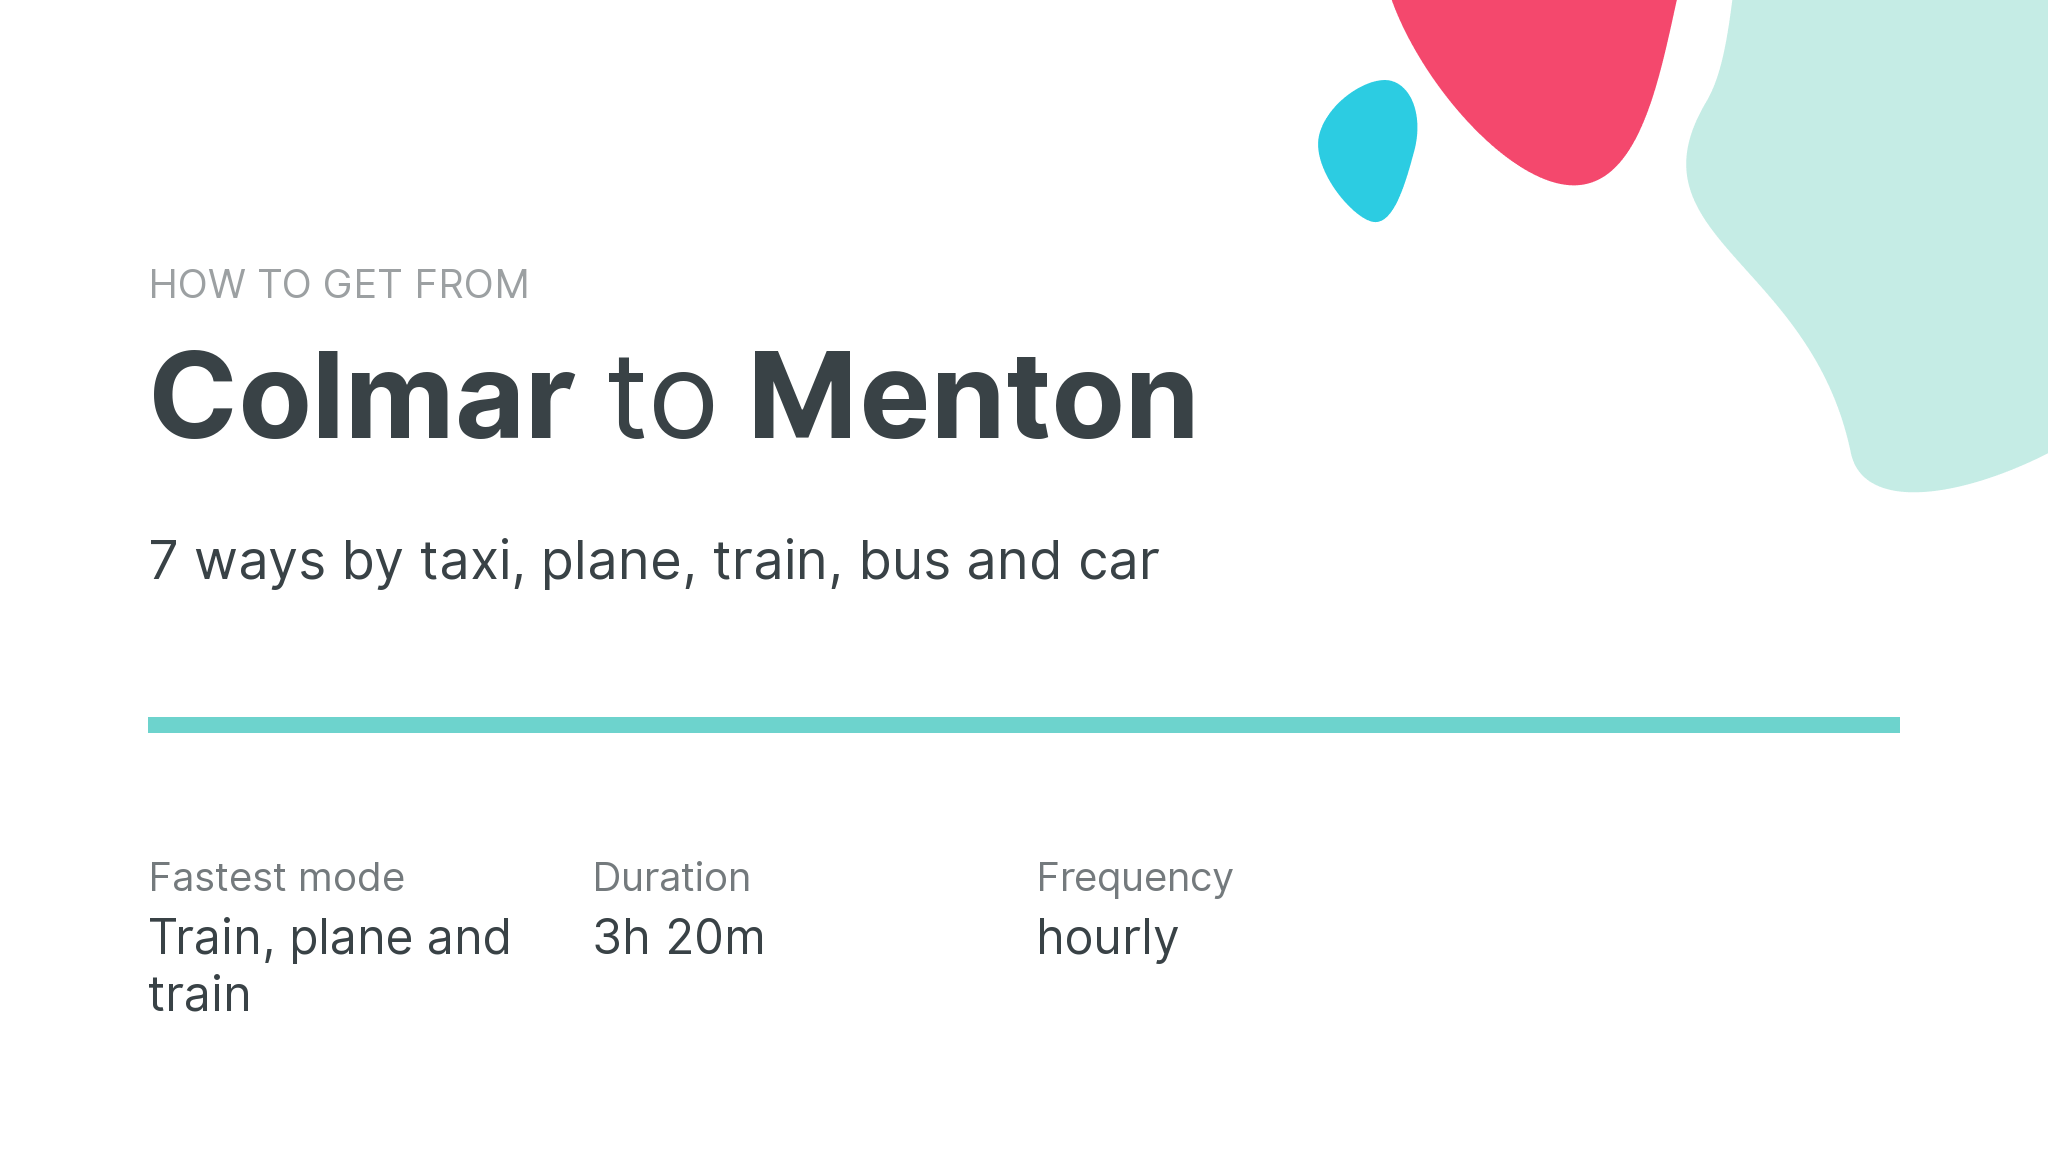 How do I get from Colmar to Menton